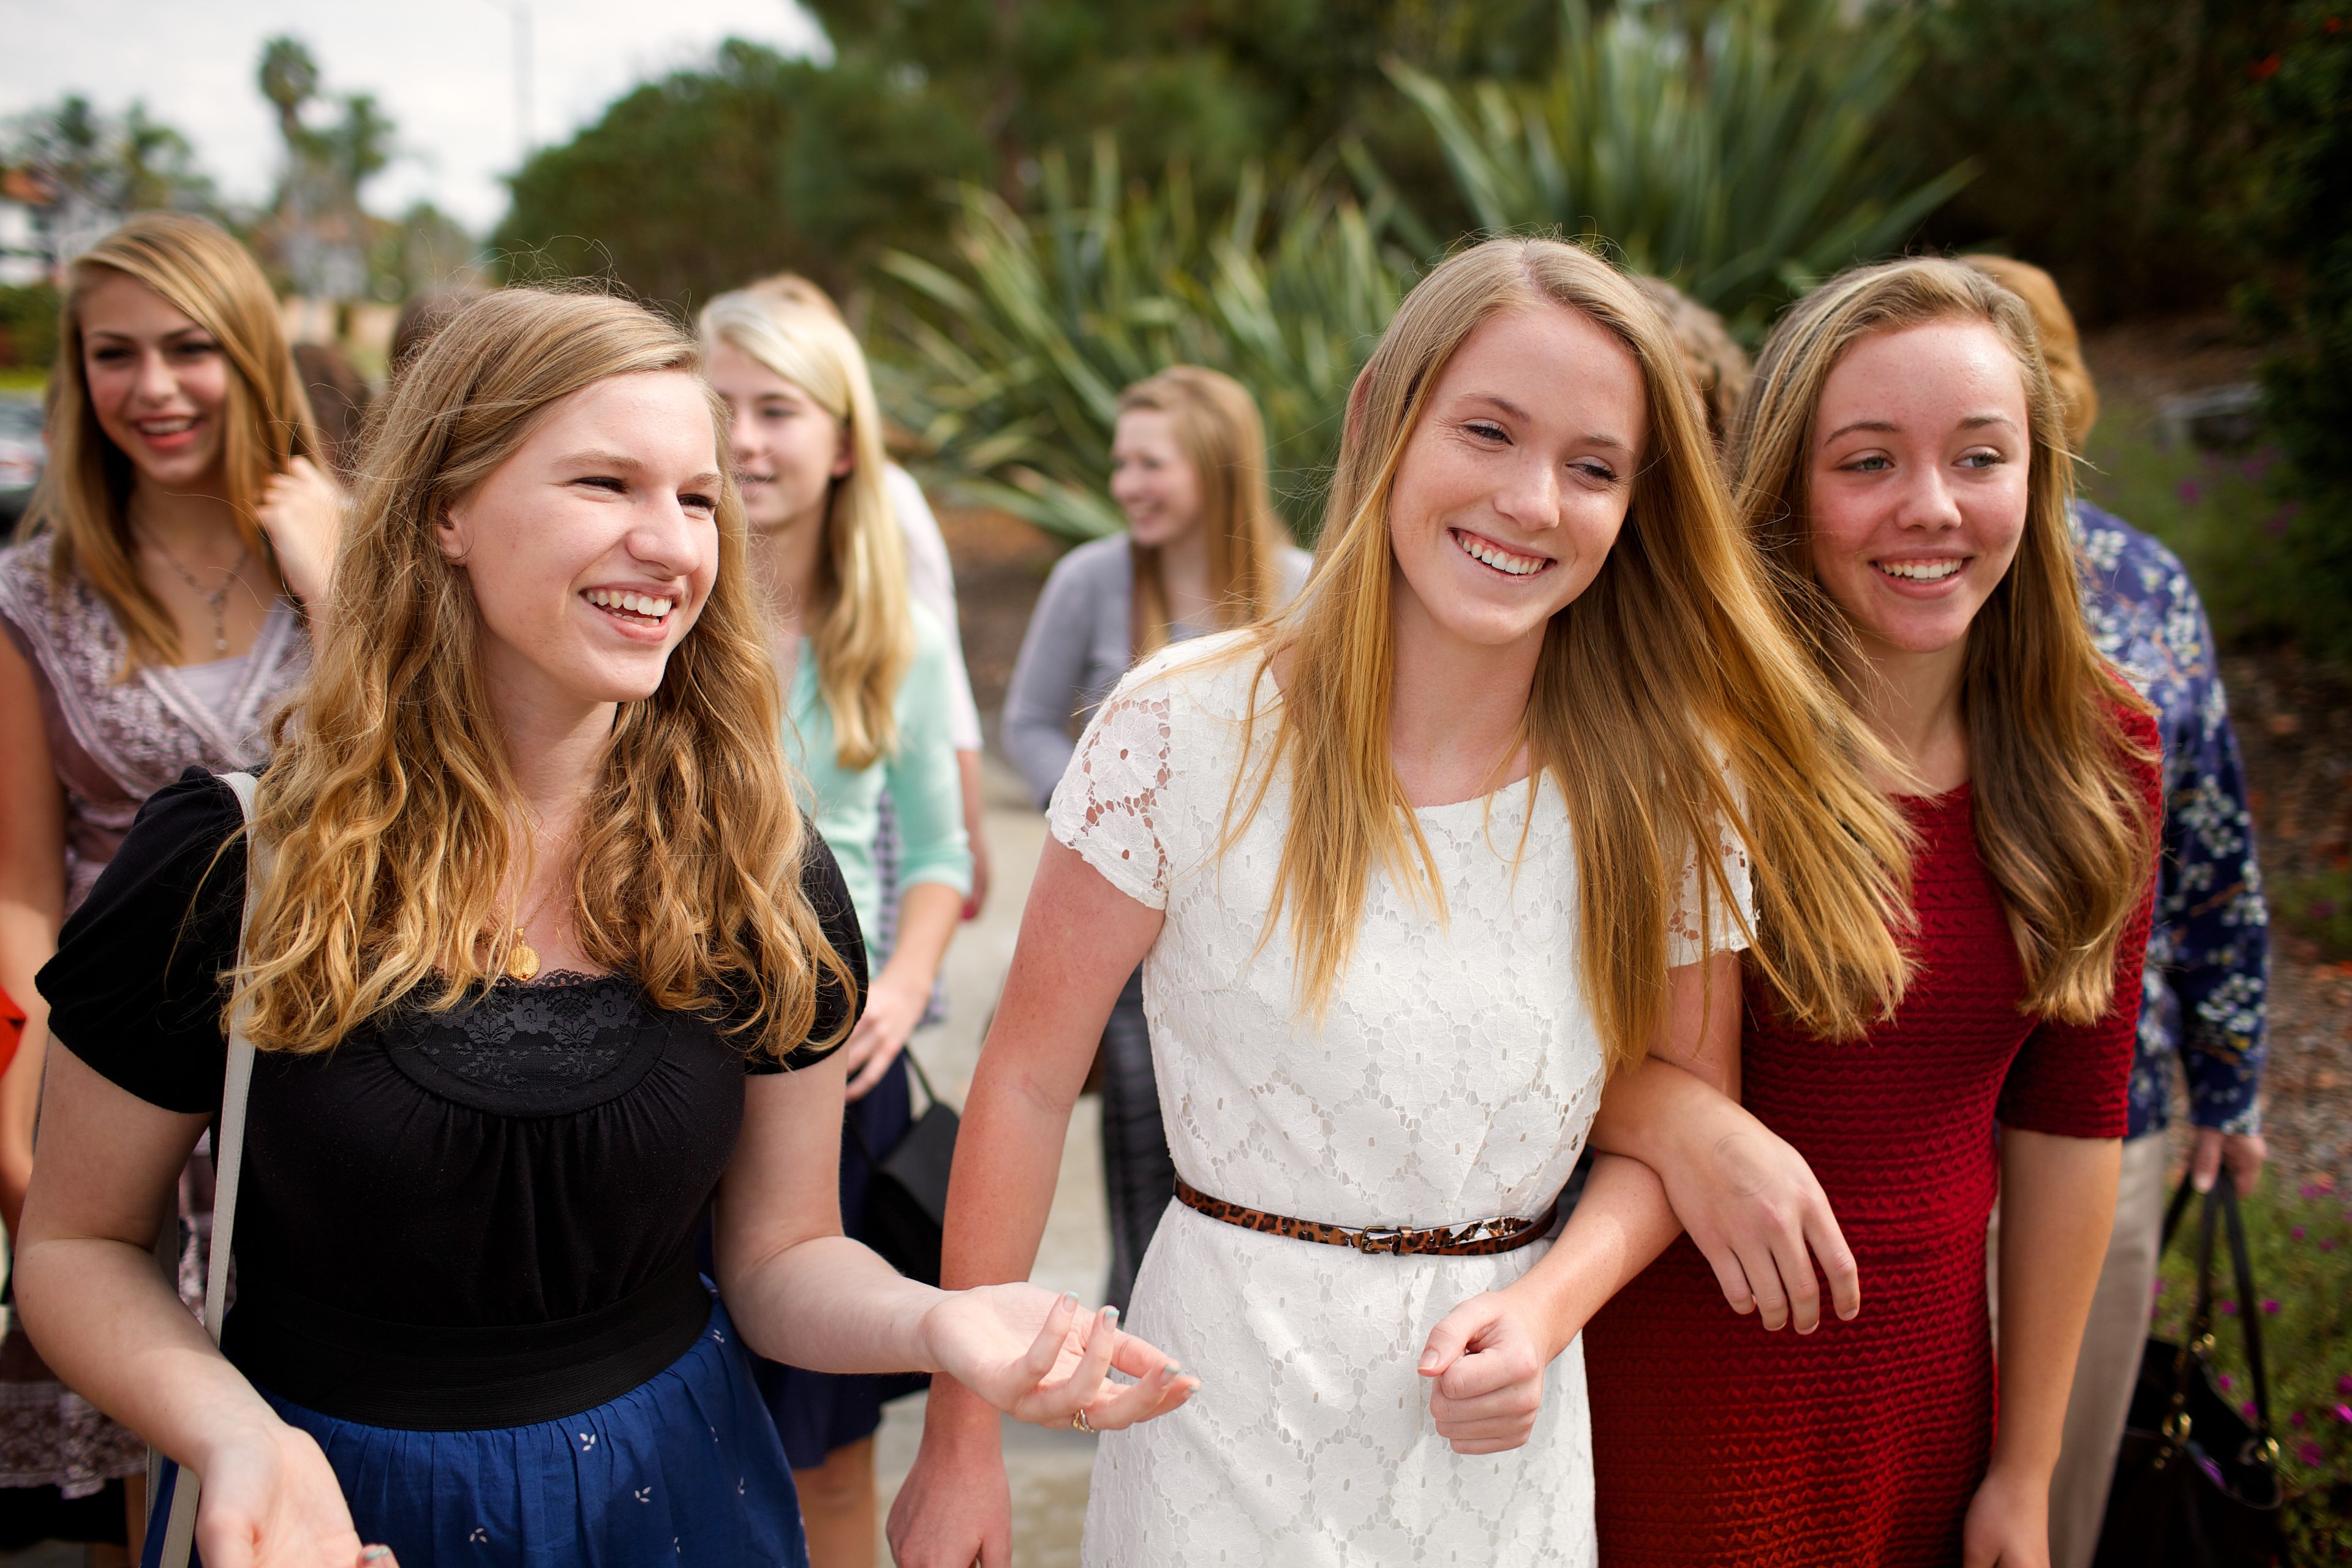 A group of young women in Sunday dress walk together outside.